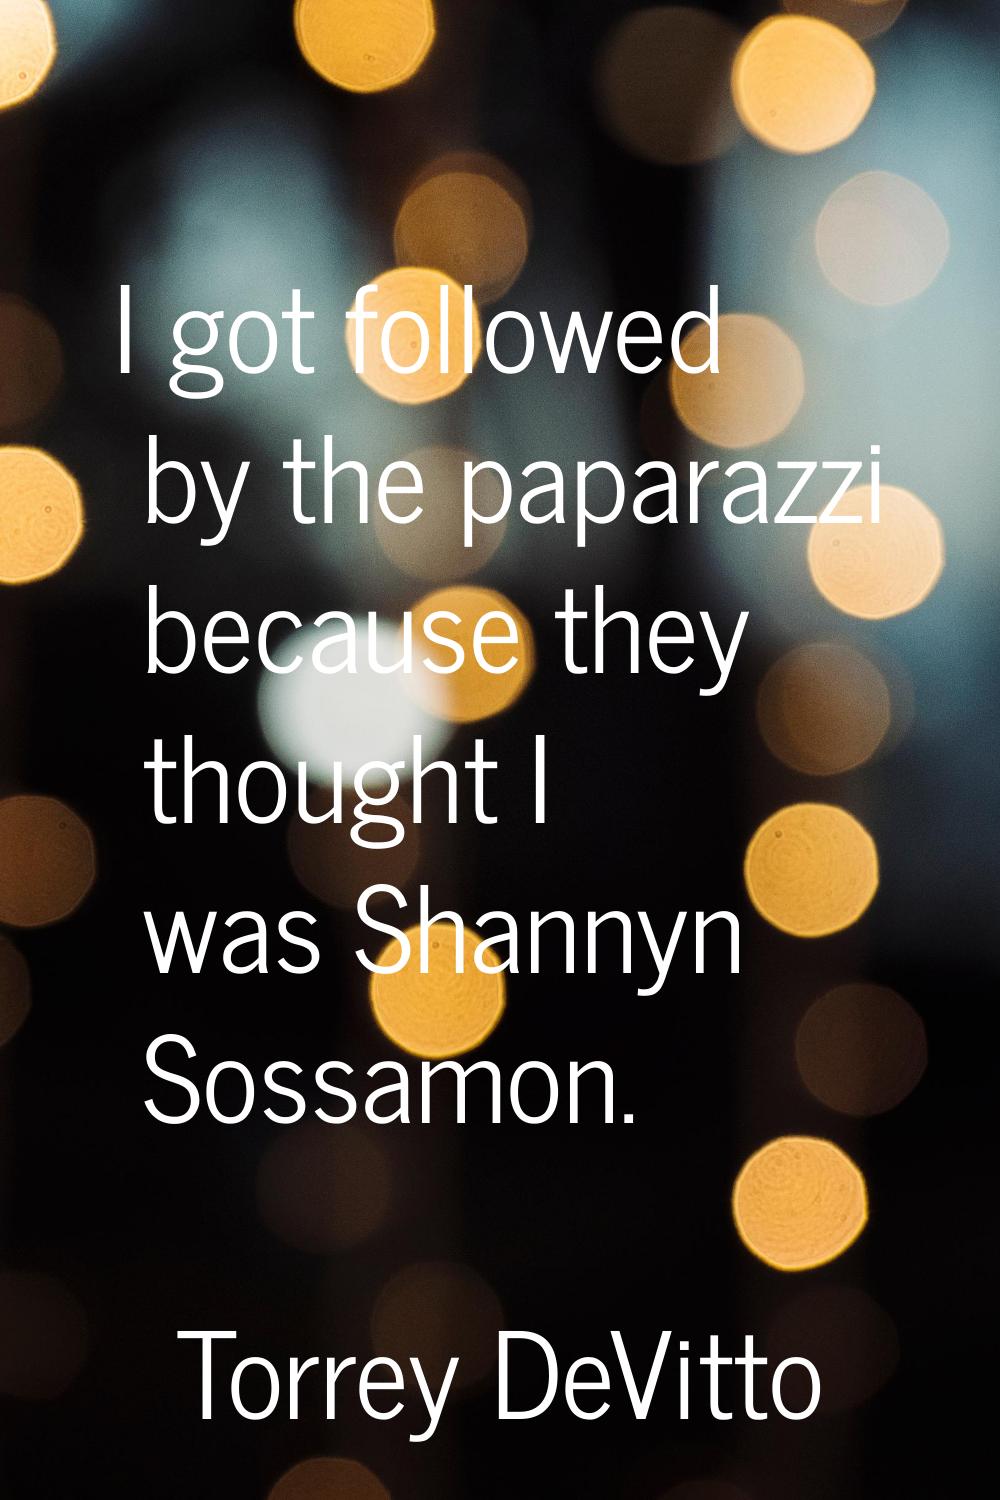 I got followed by the paparazzi because they thought I was Shannyn Sossamon.